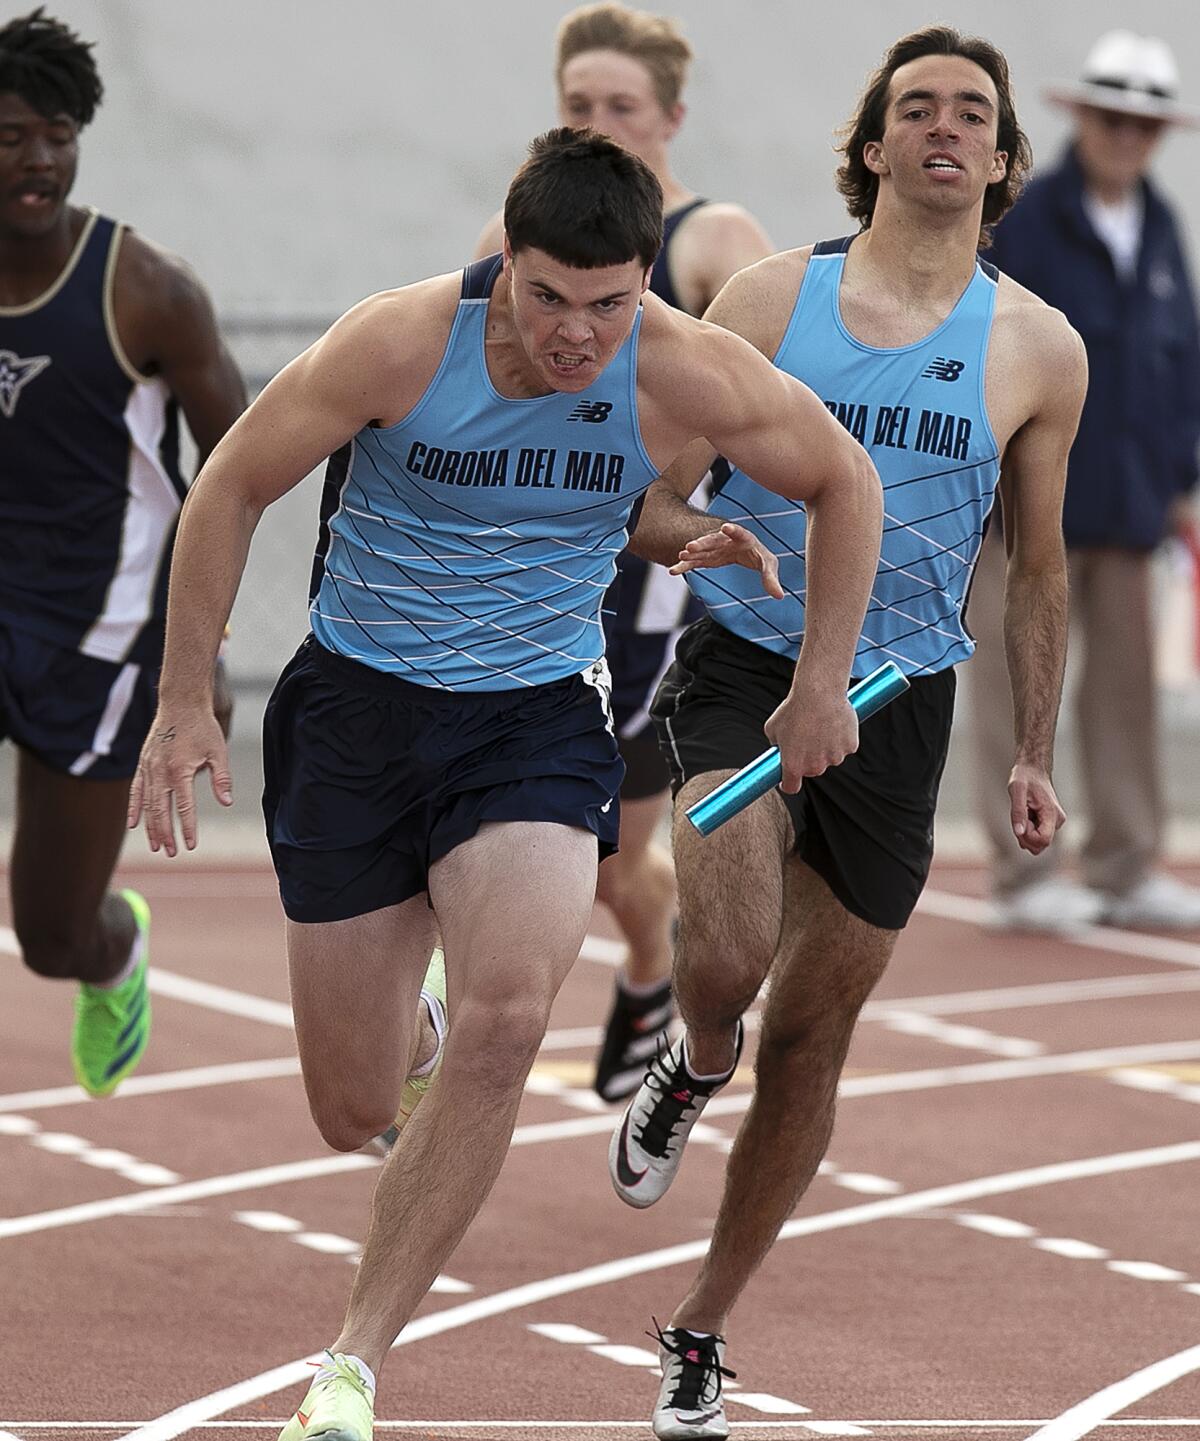 Corona del Mar's Jason Plumb, left, secures the hand-off from teammate Tanner Touchard, right, in the boys' 400-meter relay.